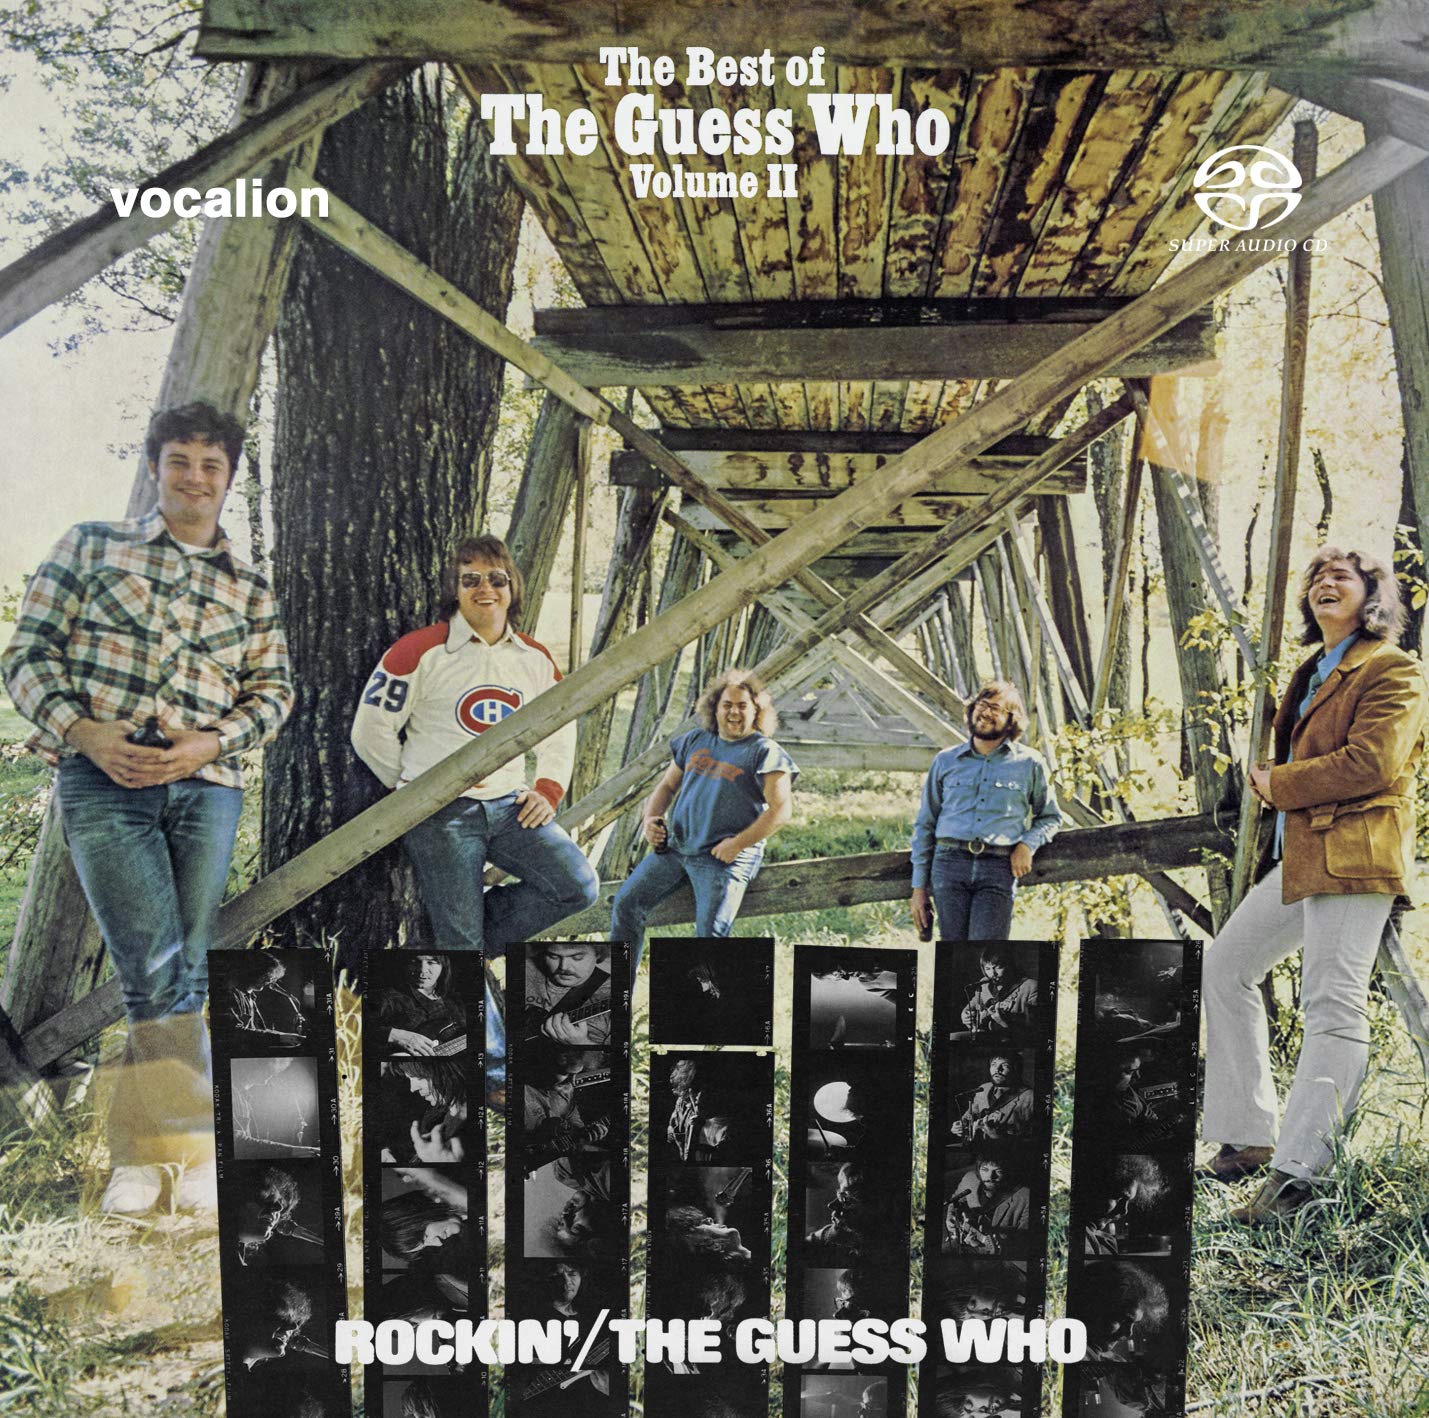 The Guess Who – Rockin’ & The Best Of The Guess Who Vol. 2 (1972+73) MCH SACD ISO + FLAC 24bit/96kHz